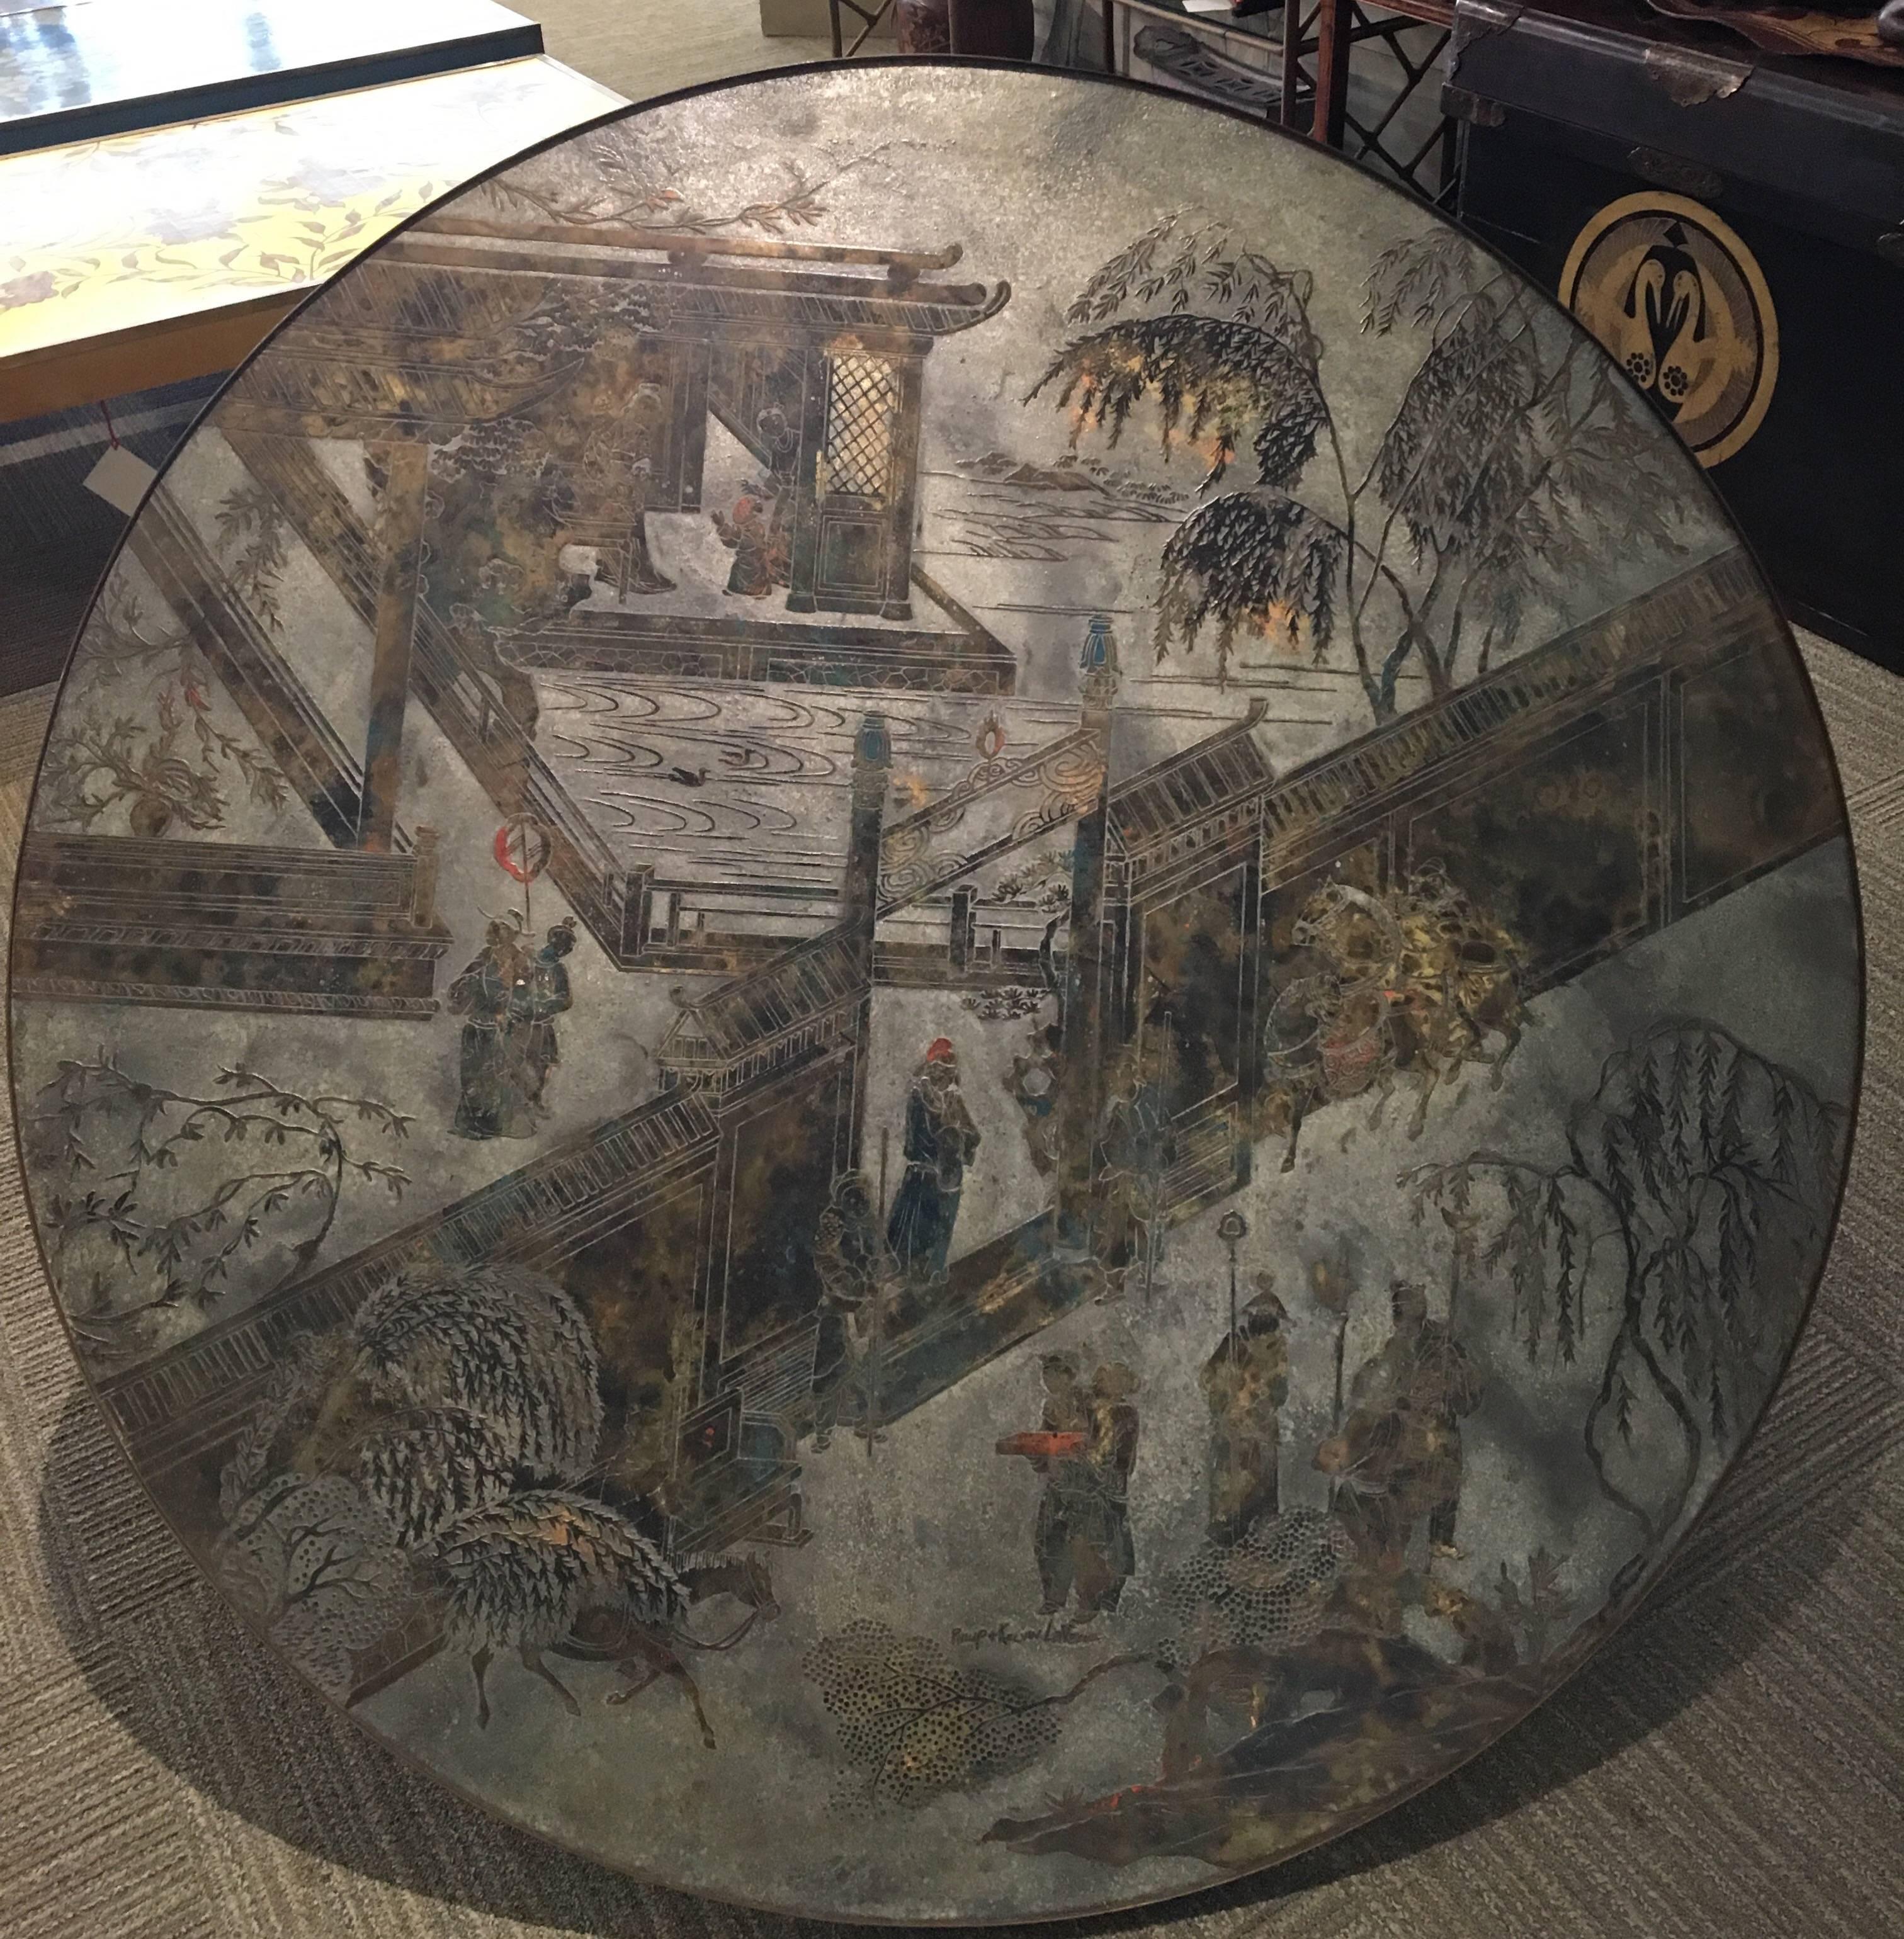 A large round Chan coffee table with figures and landscapes by Philip and Kelvin LaVerne. Signed by Philip and Kelvin LaVerne.